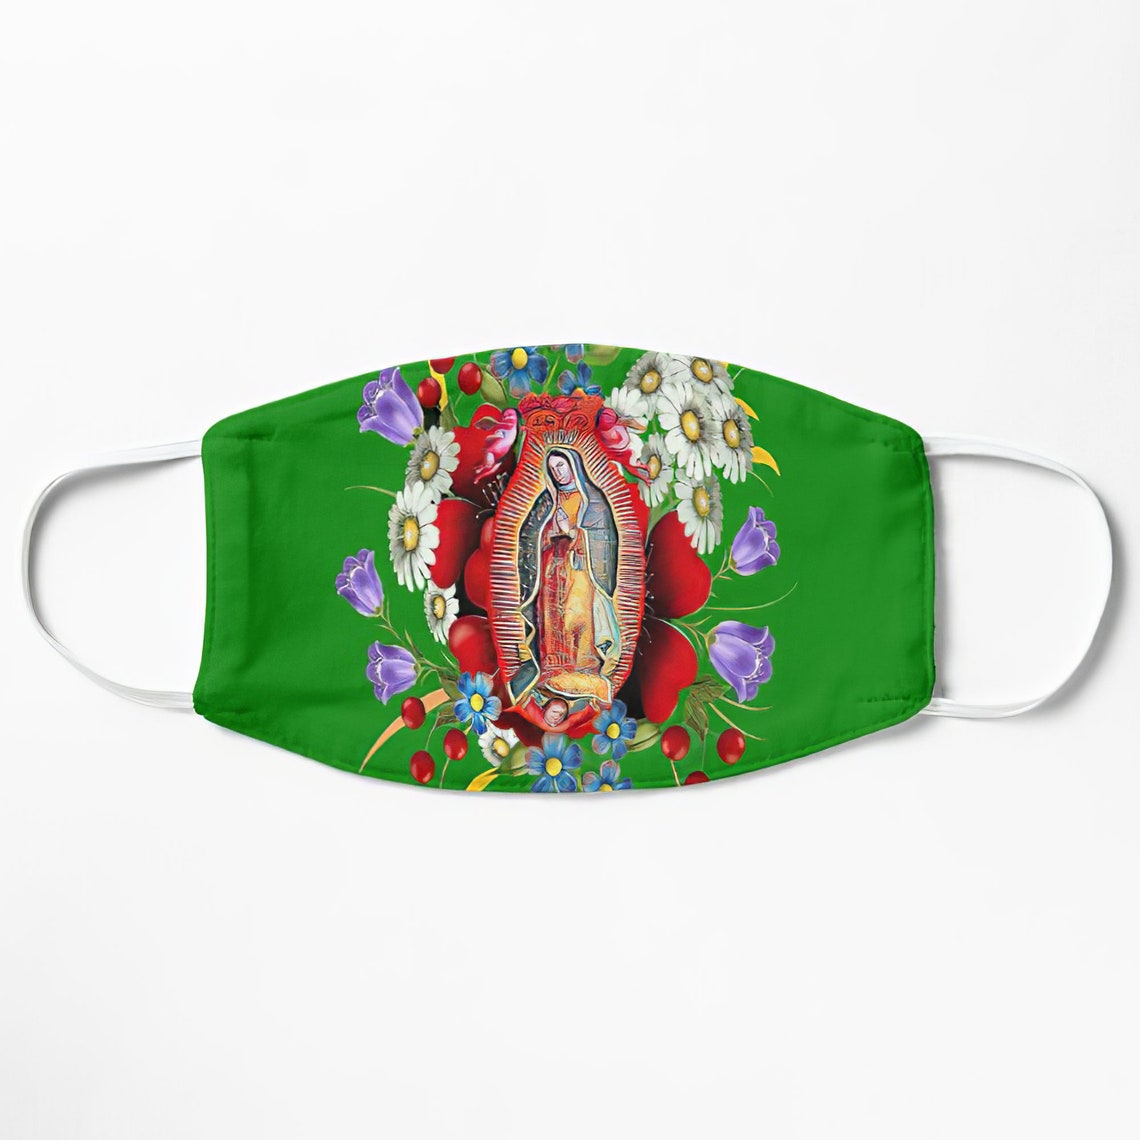 Our Lady Of Guadalupe Mexican Virgin Mary Mexico Angels Tilma Etsy